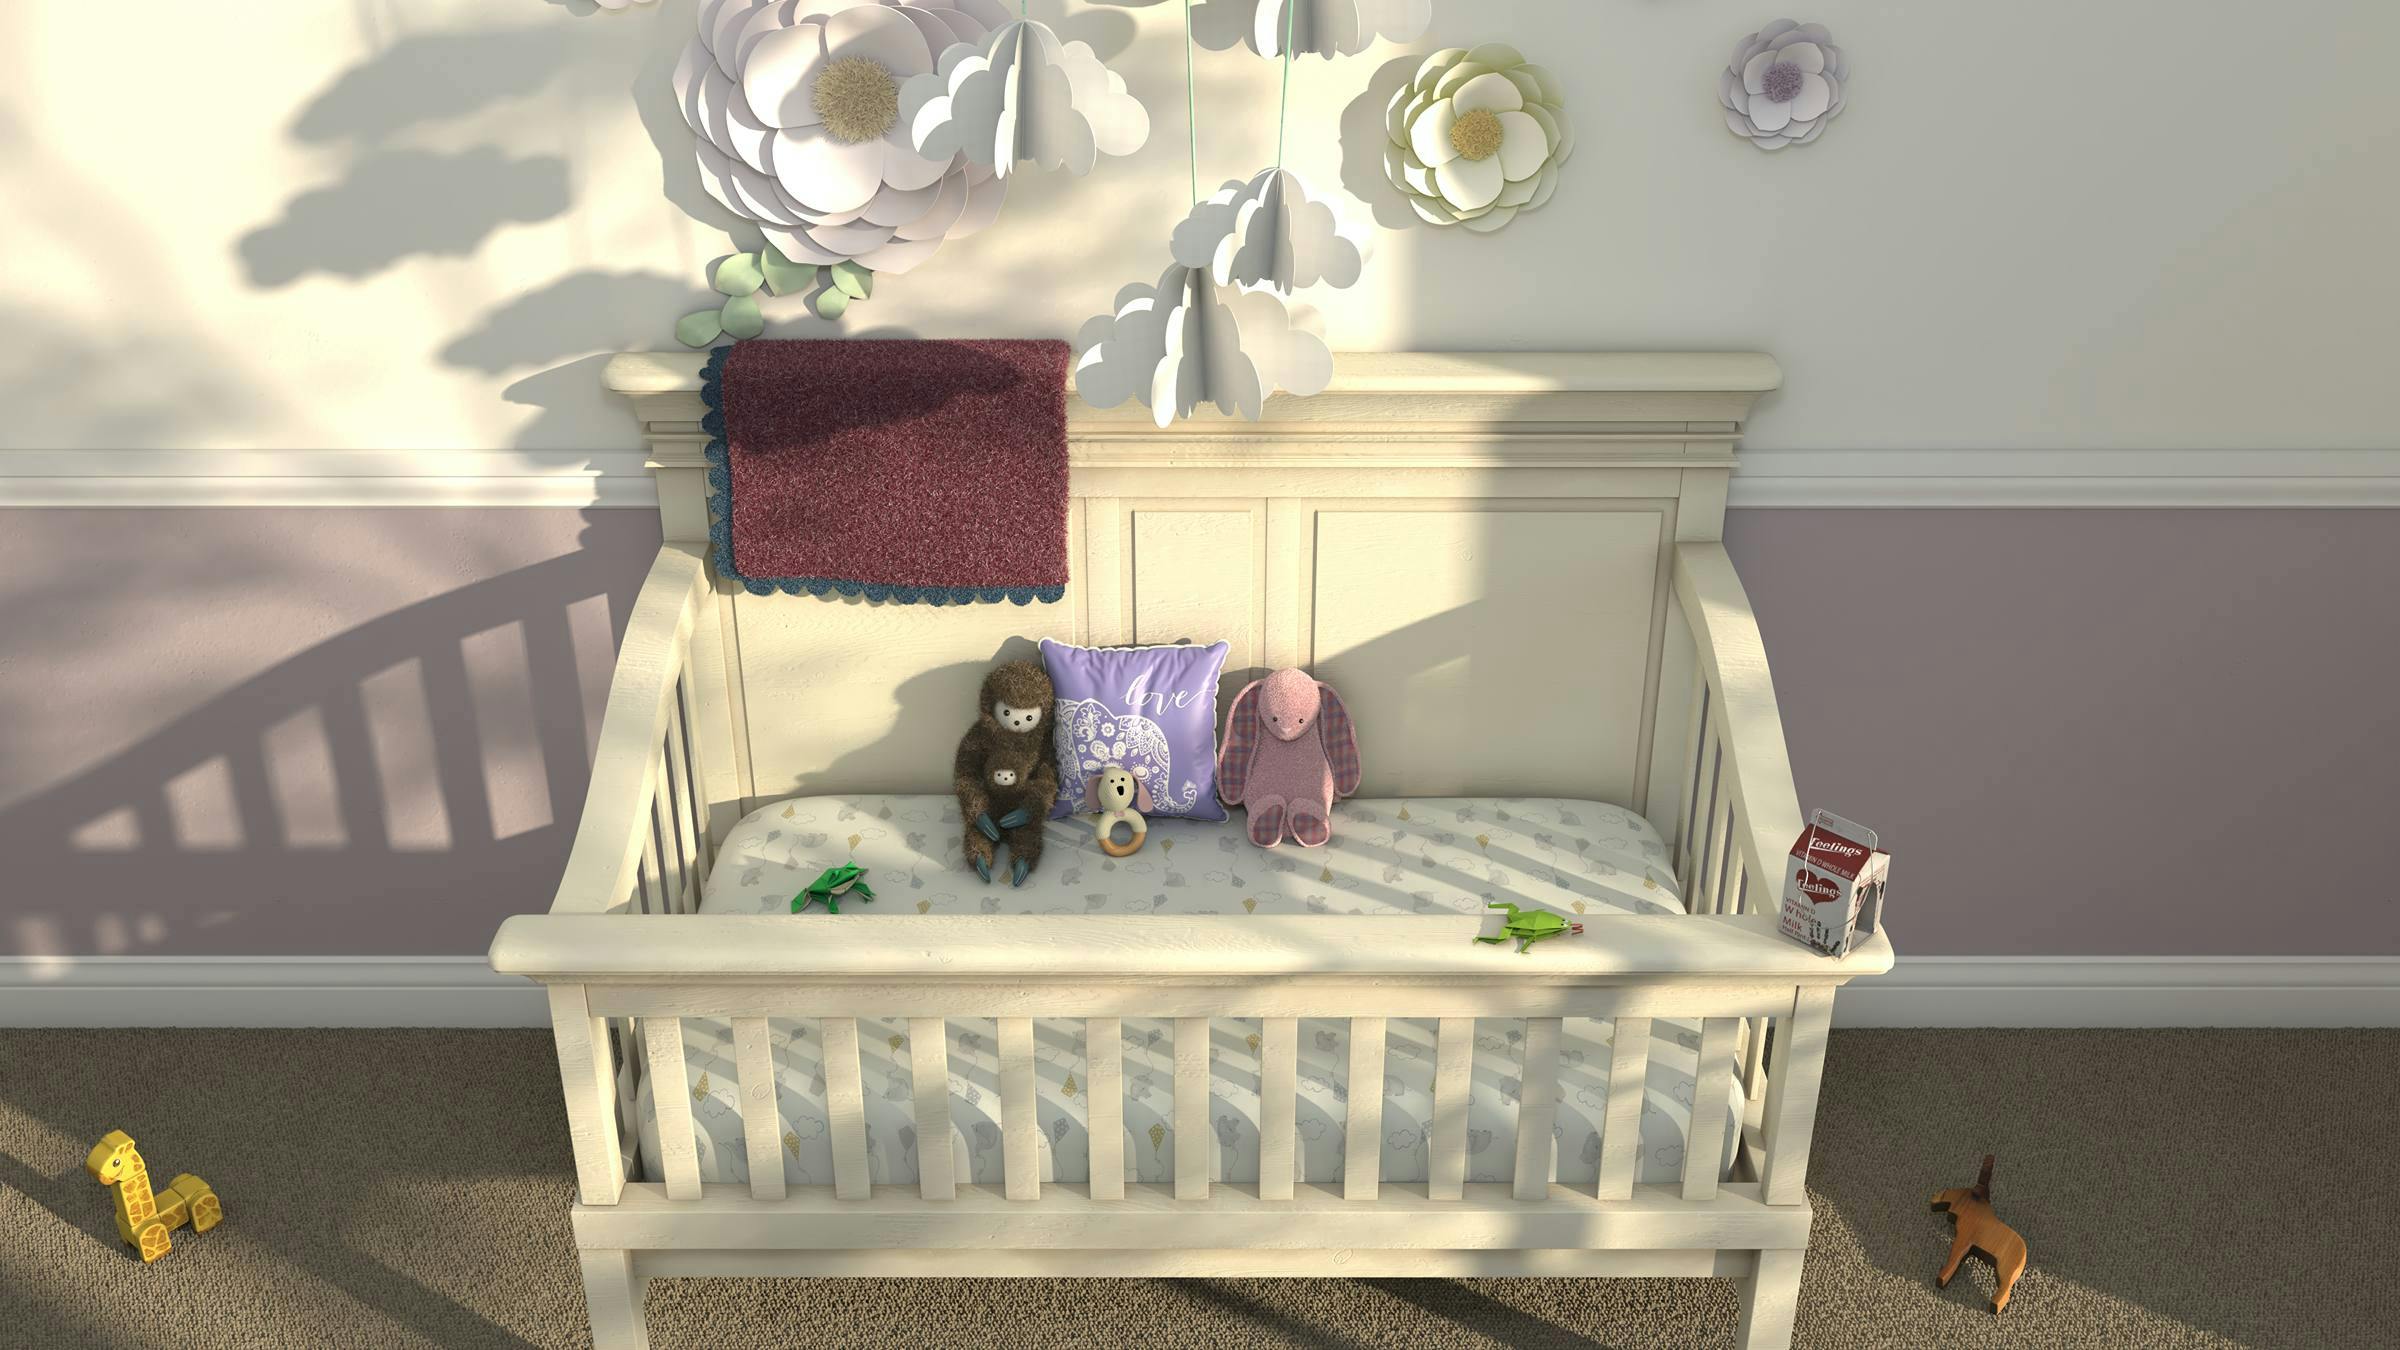 White baby cot with many toys placed inside and on the floor next to it.